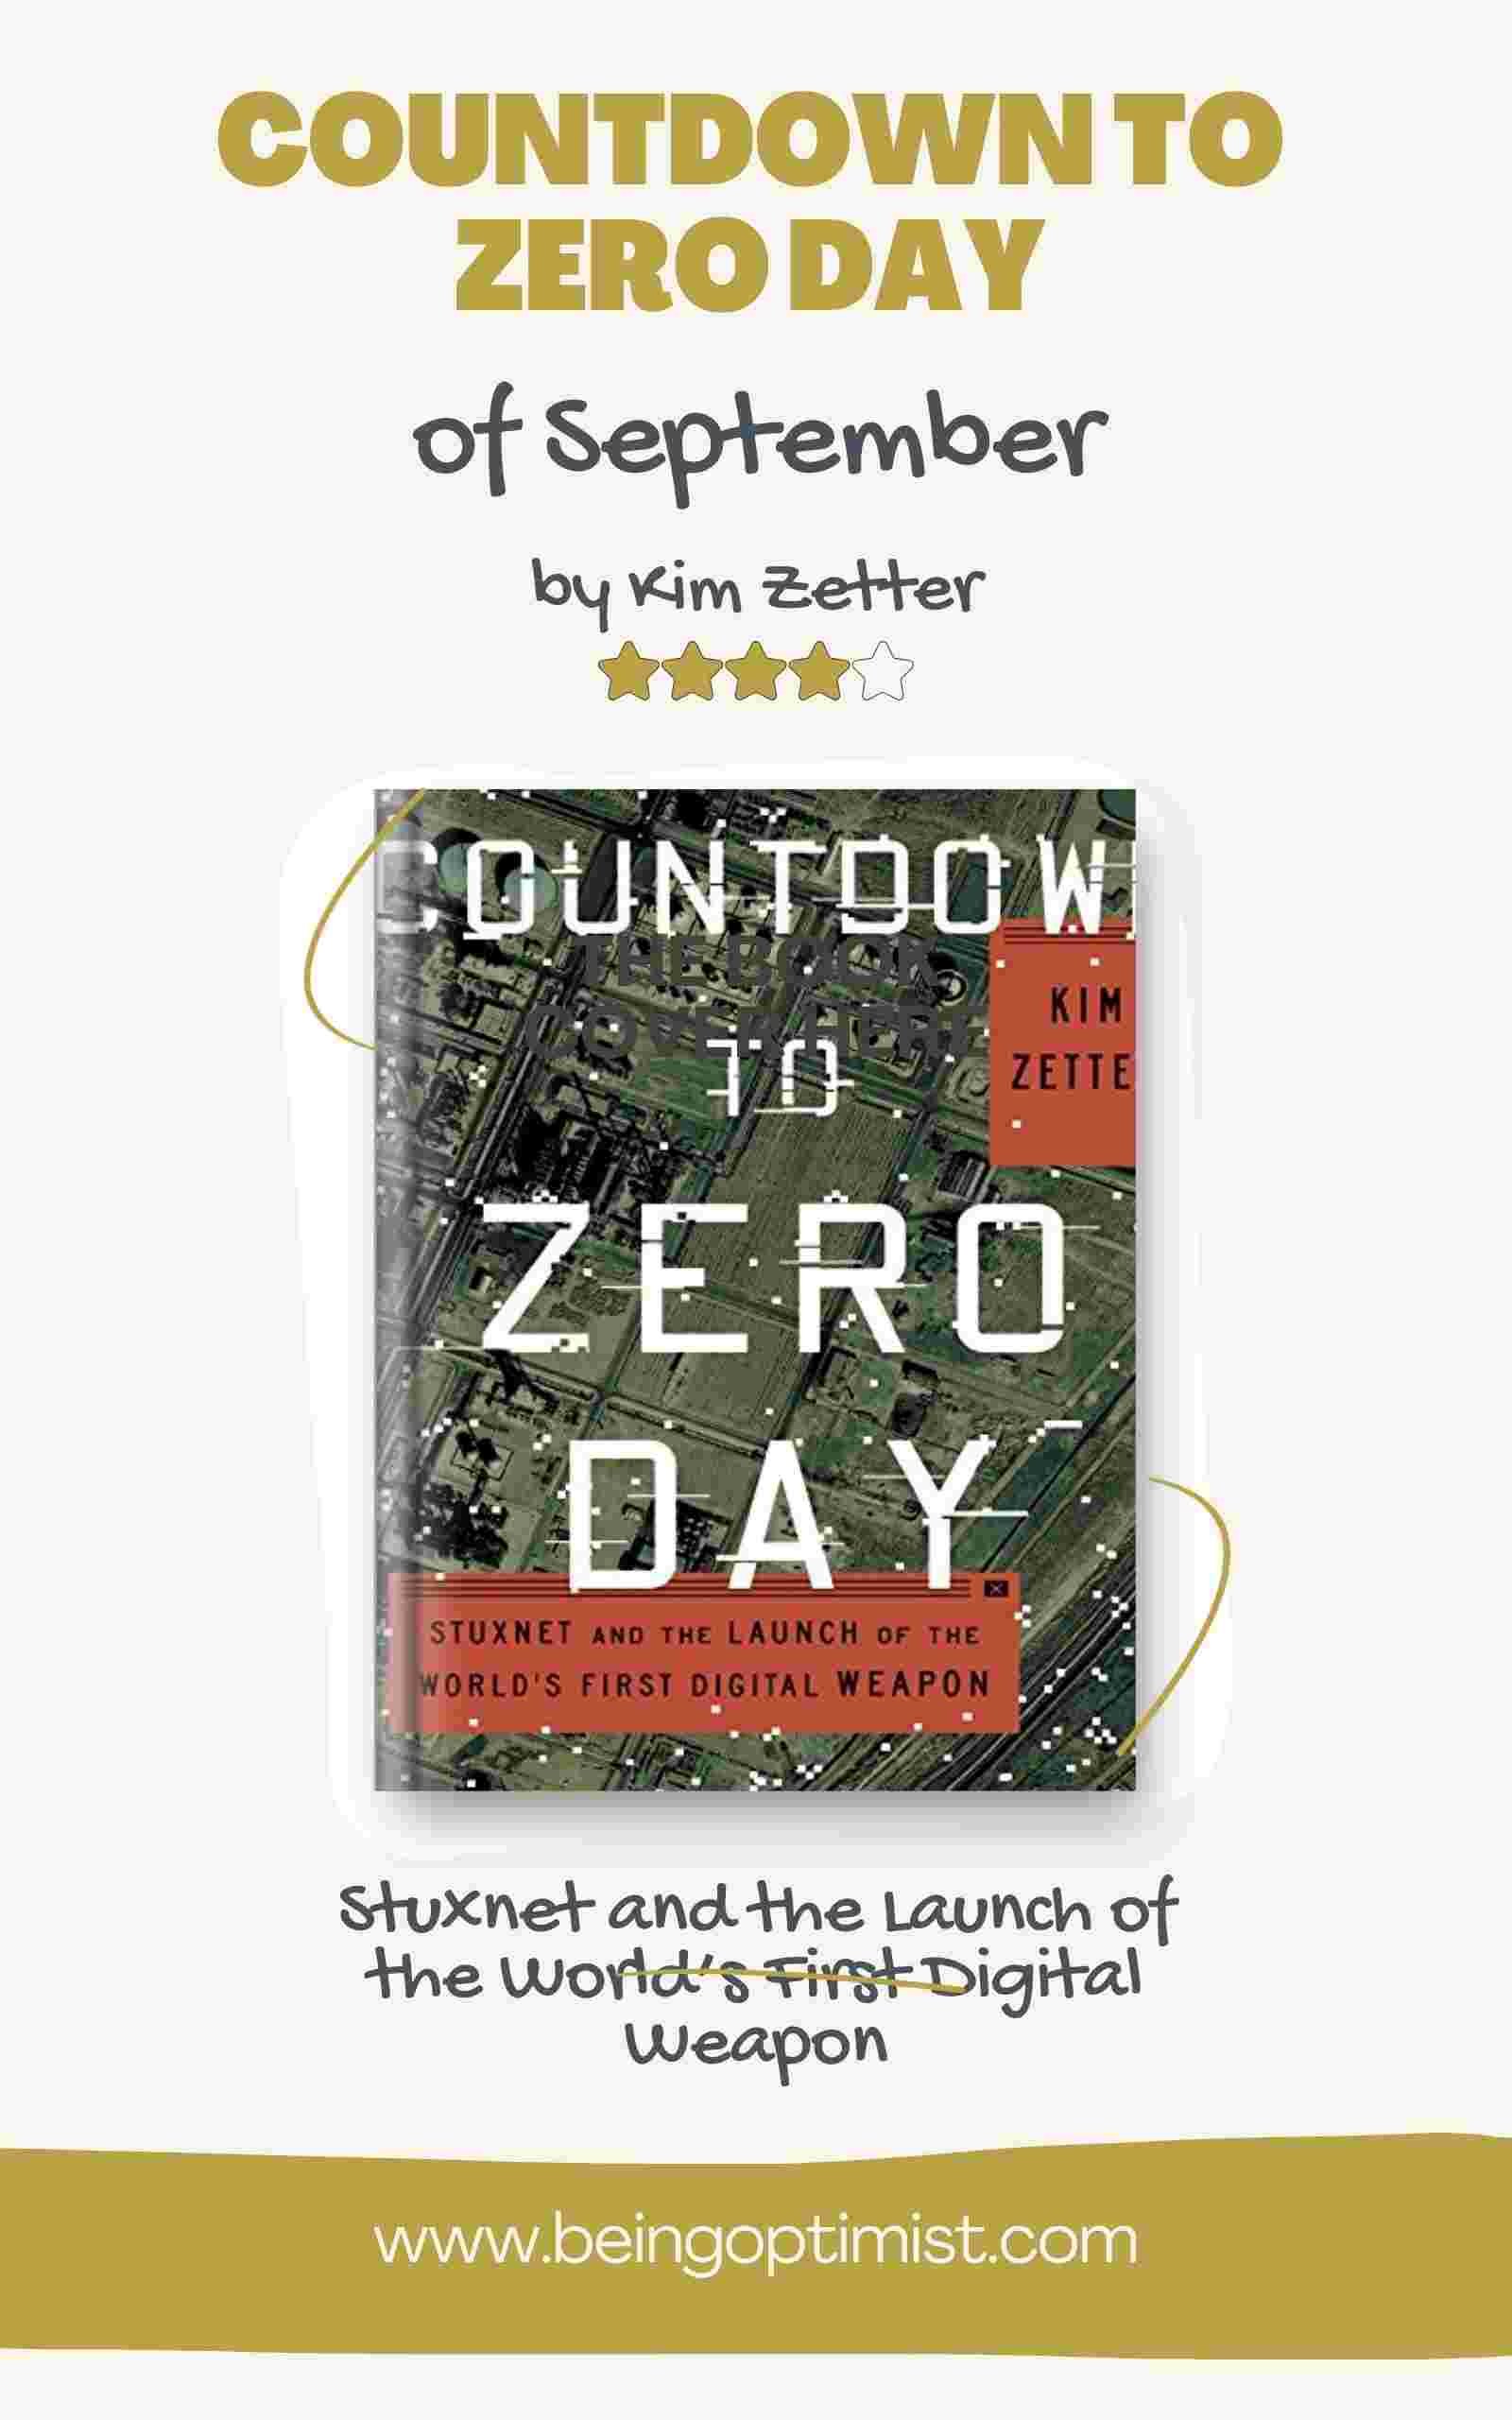 Countdown to Zero Day: Stuxnet and the Launch of the World's First Digital Weapon' by Kim Zetter